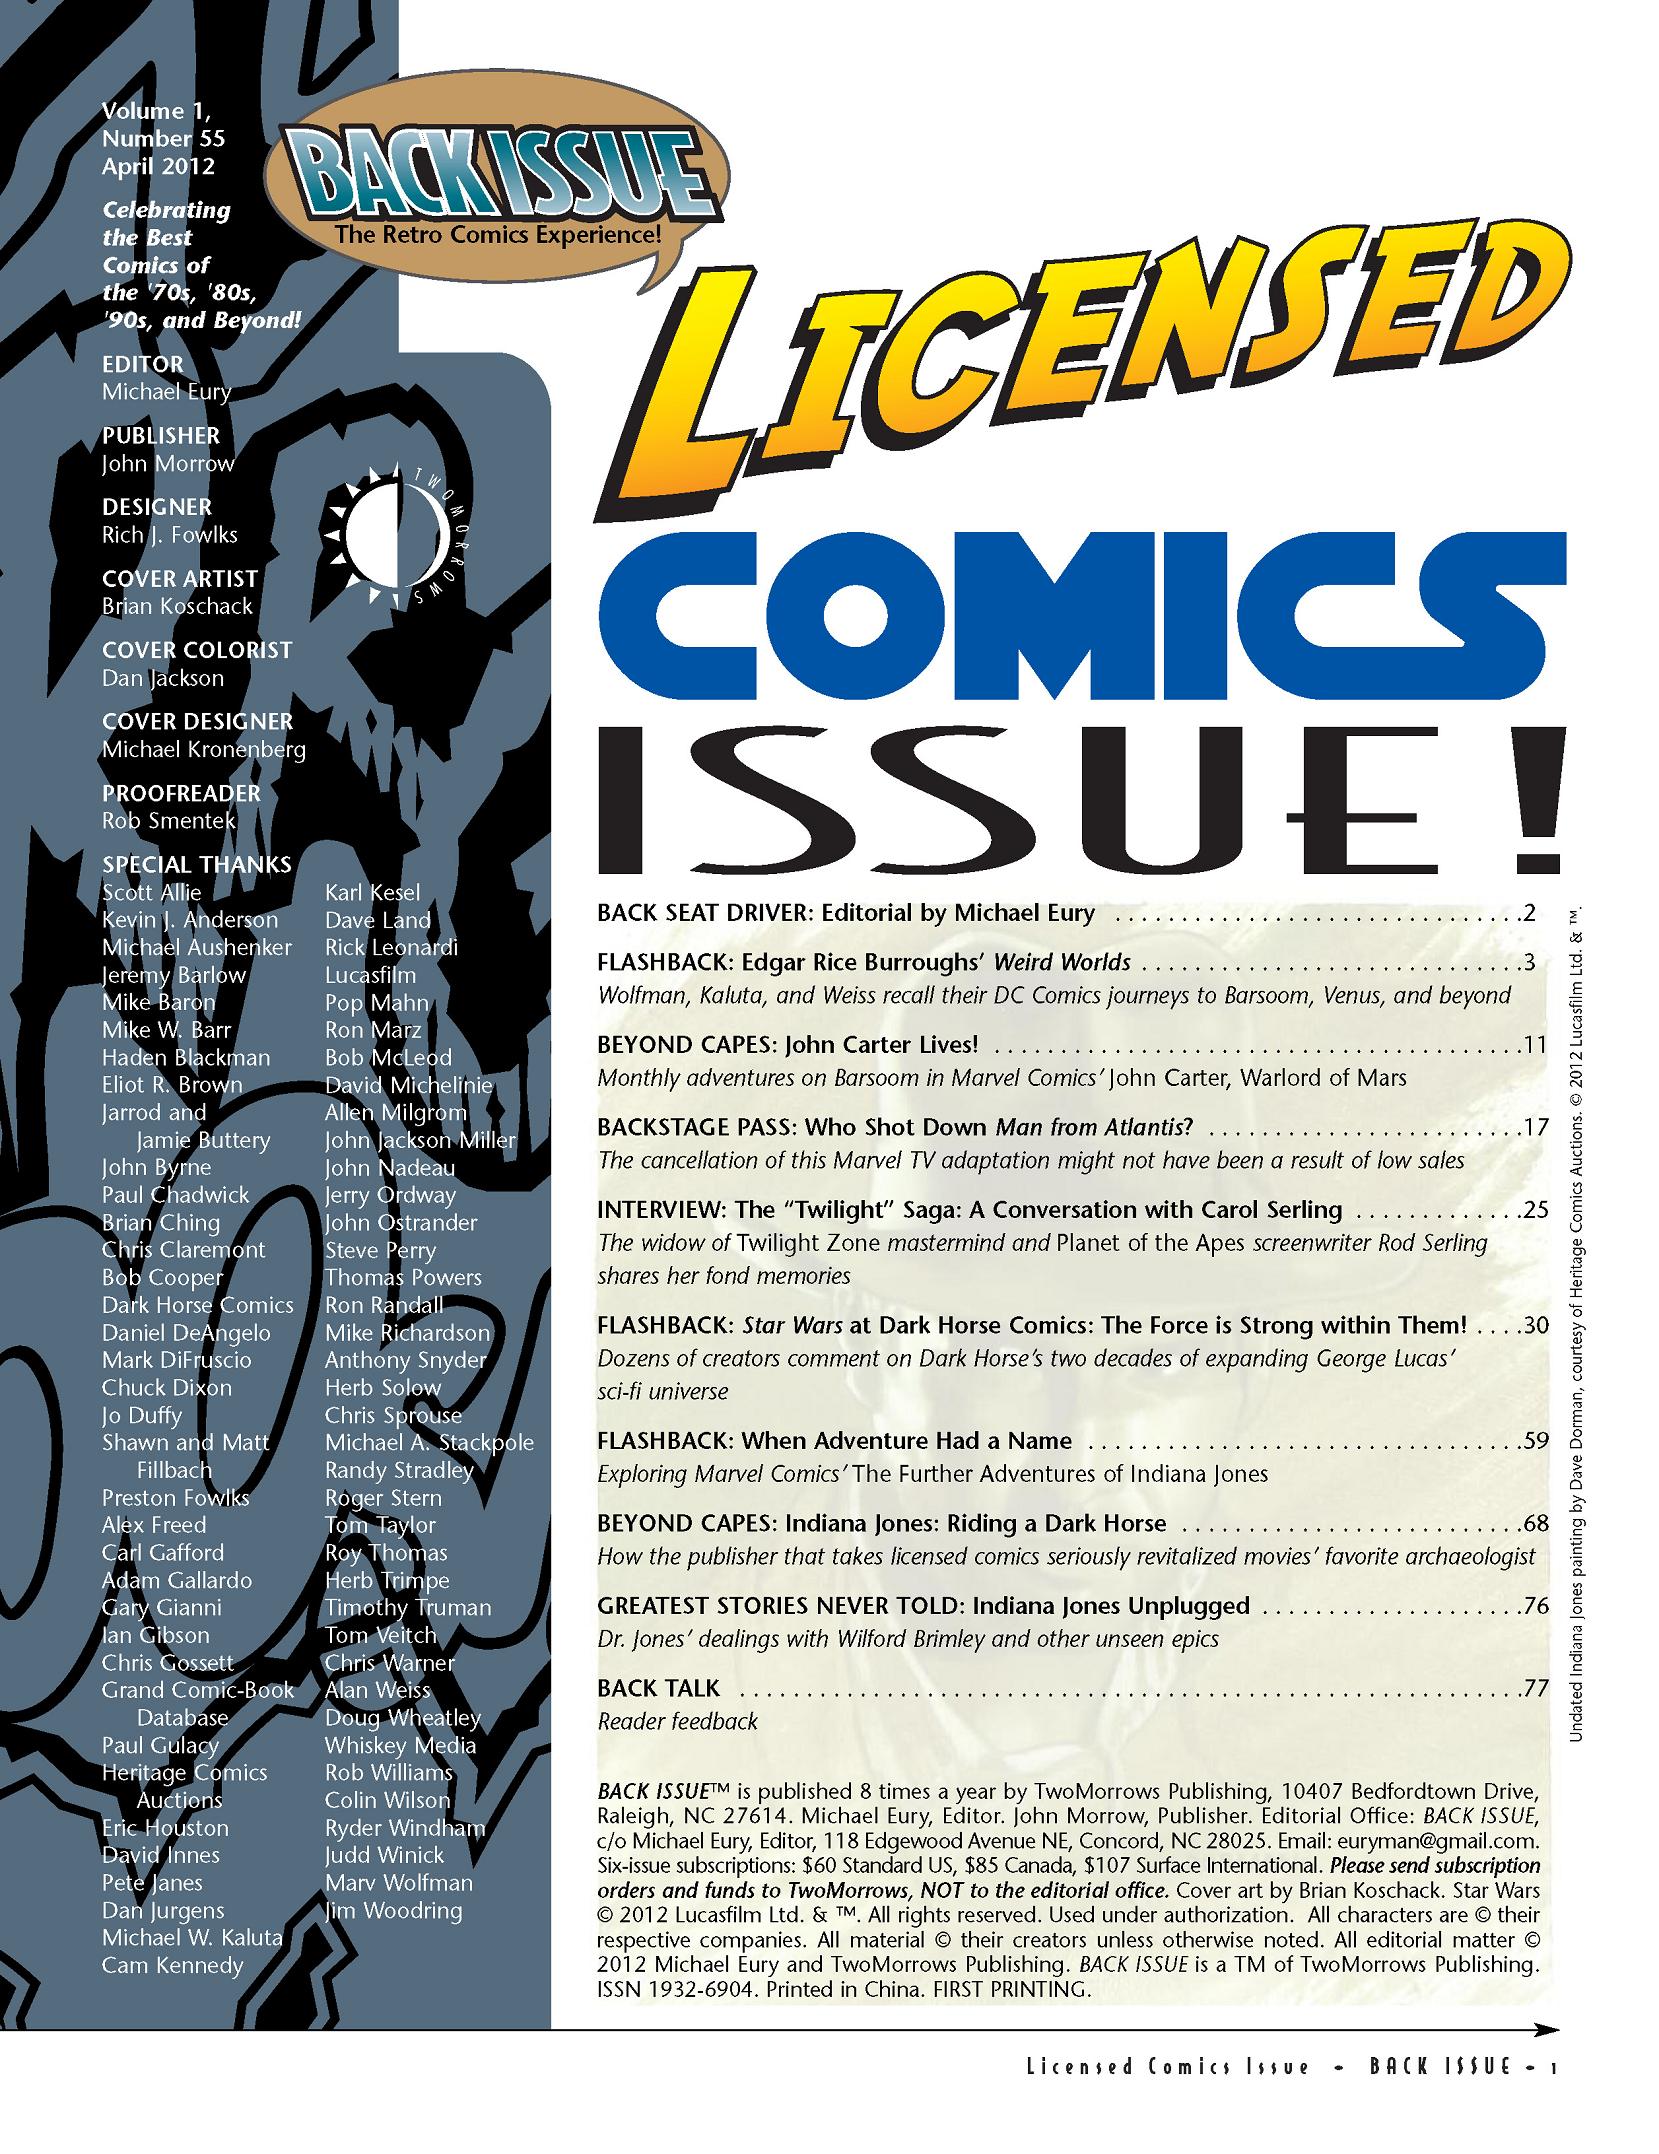 Read online Back Issue comic -  Issue #55 - 3